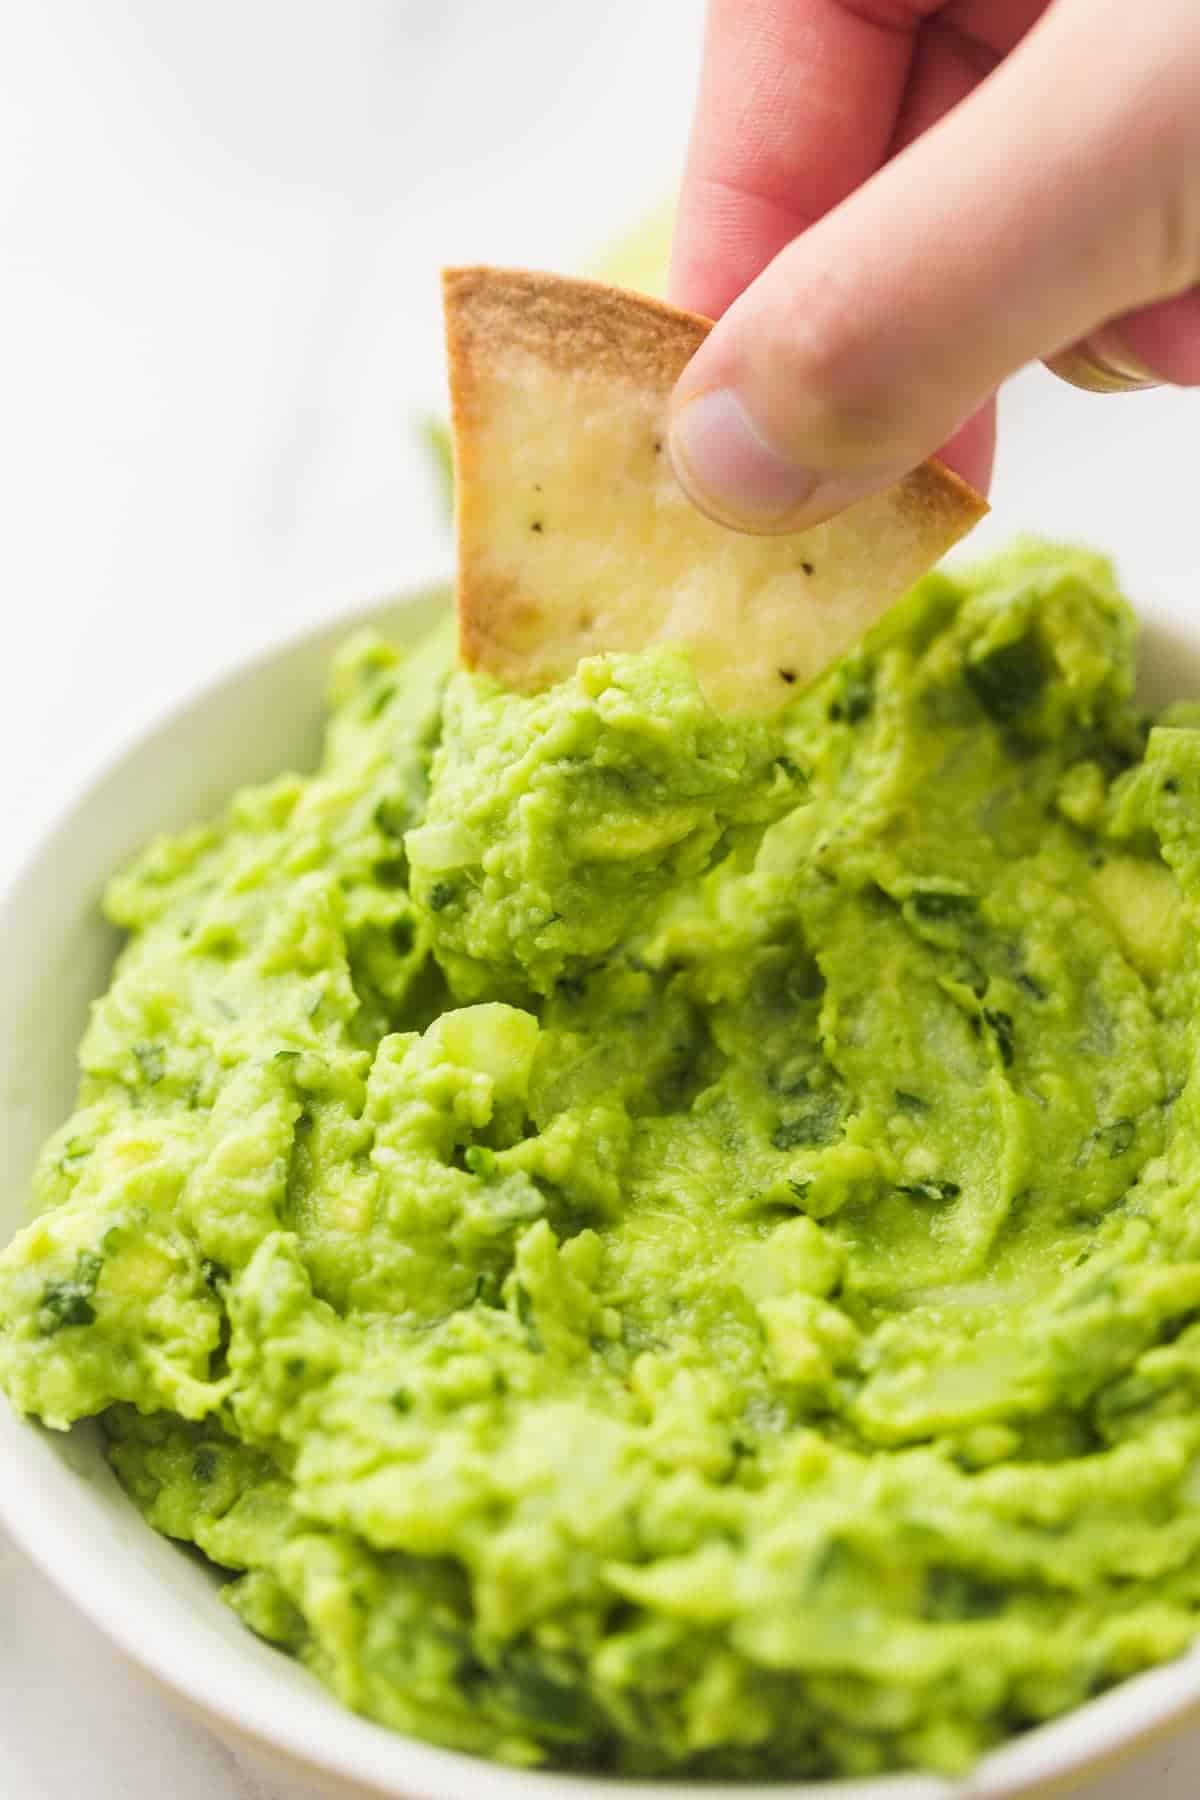 Eating guacamole with tortilla chips